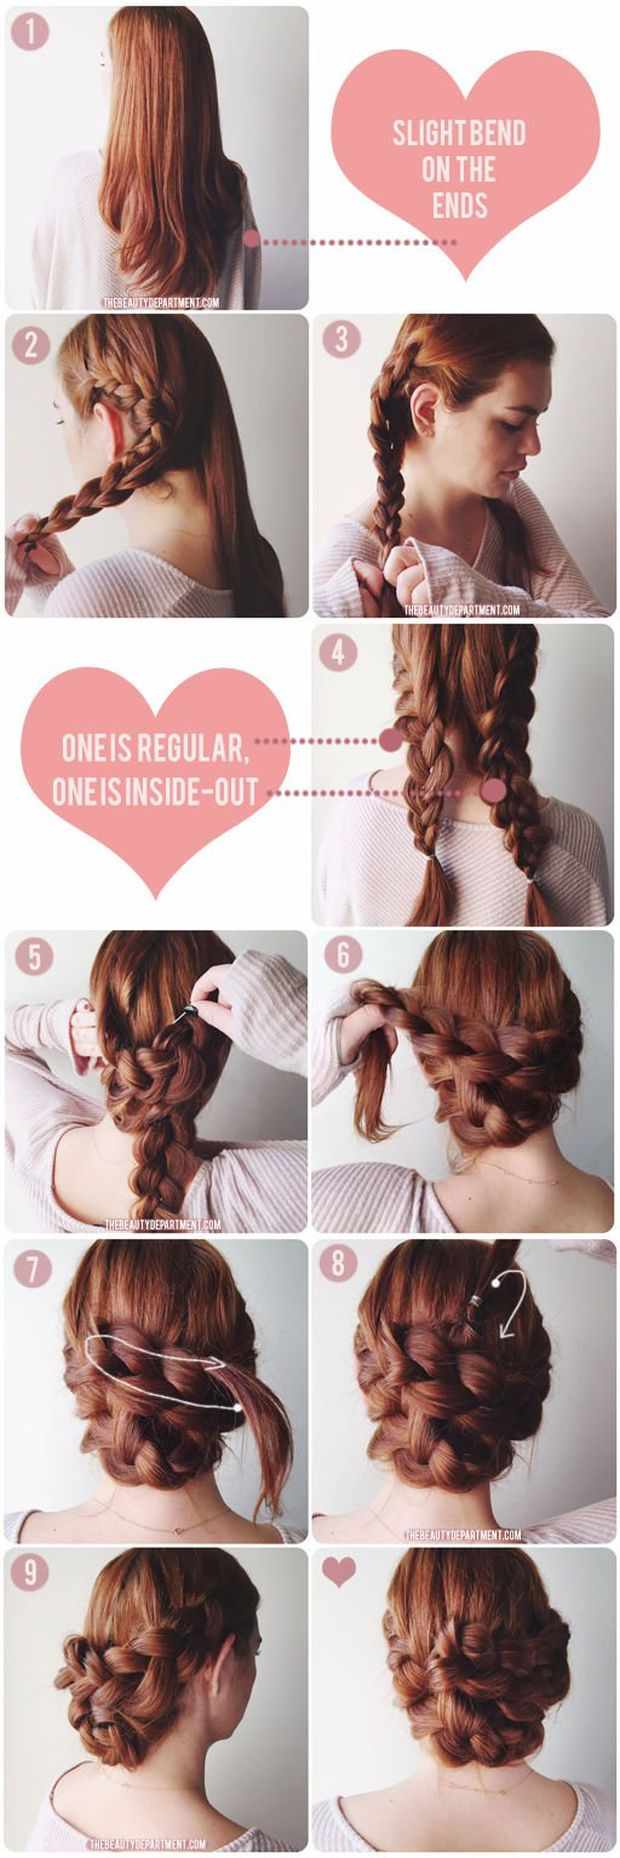 simple and fast hairstyle valentine's day original hairstyle idea